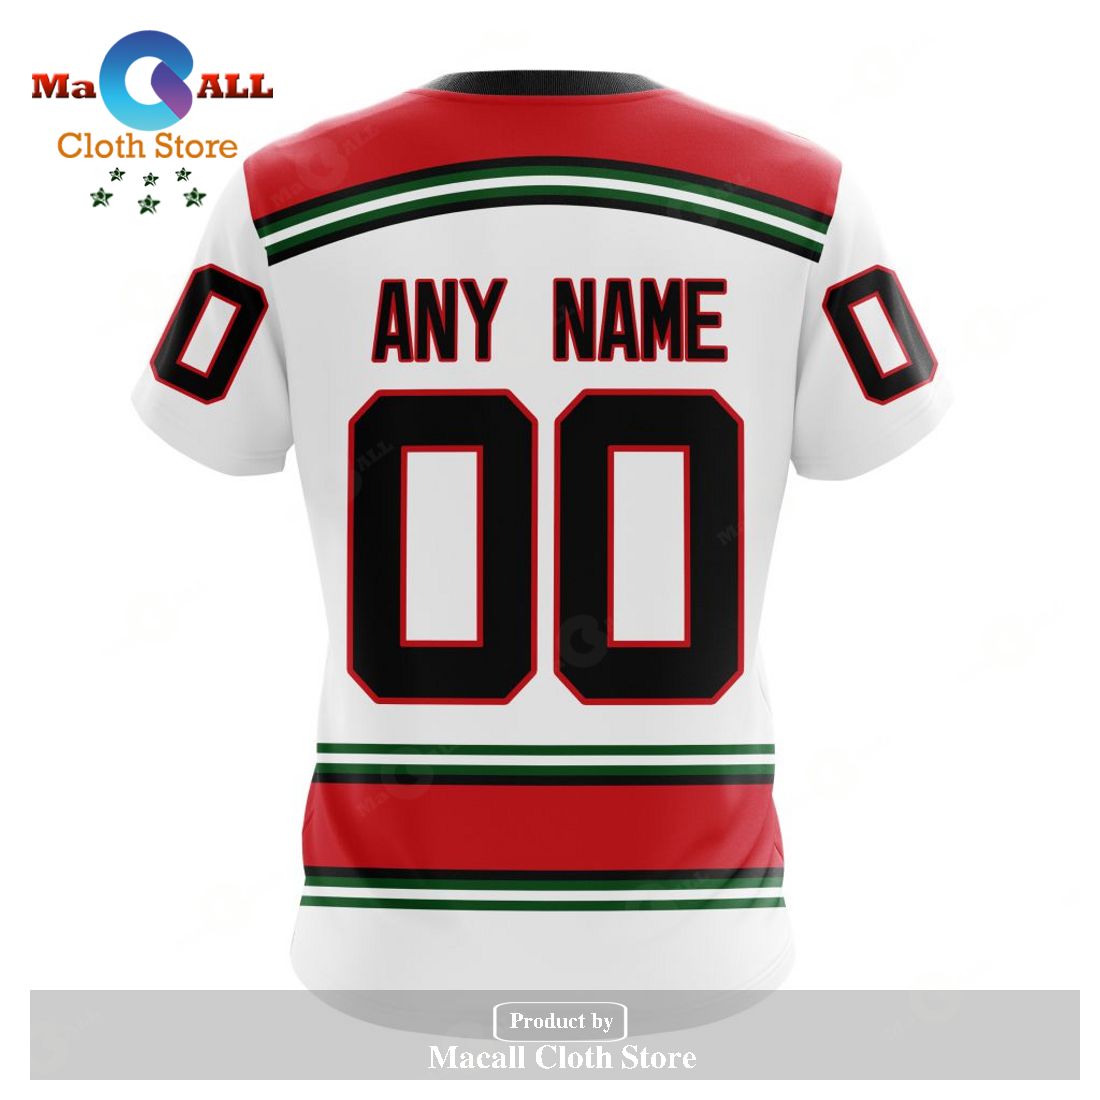 Personalized NHL New Jersey Devils Reverse Retro 3D Hoodie All